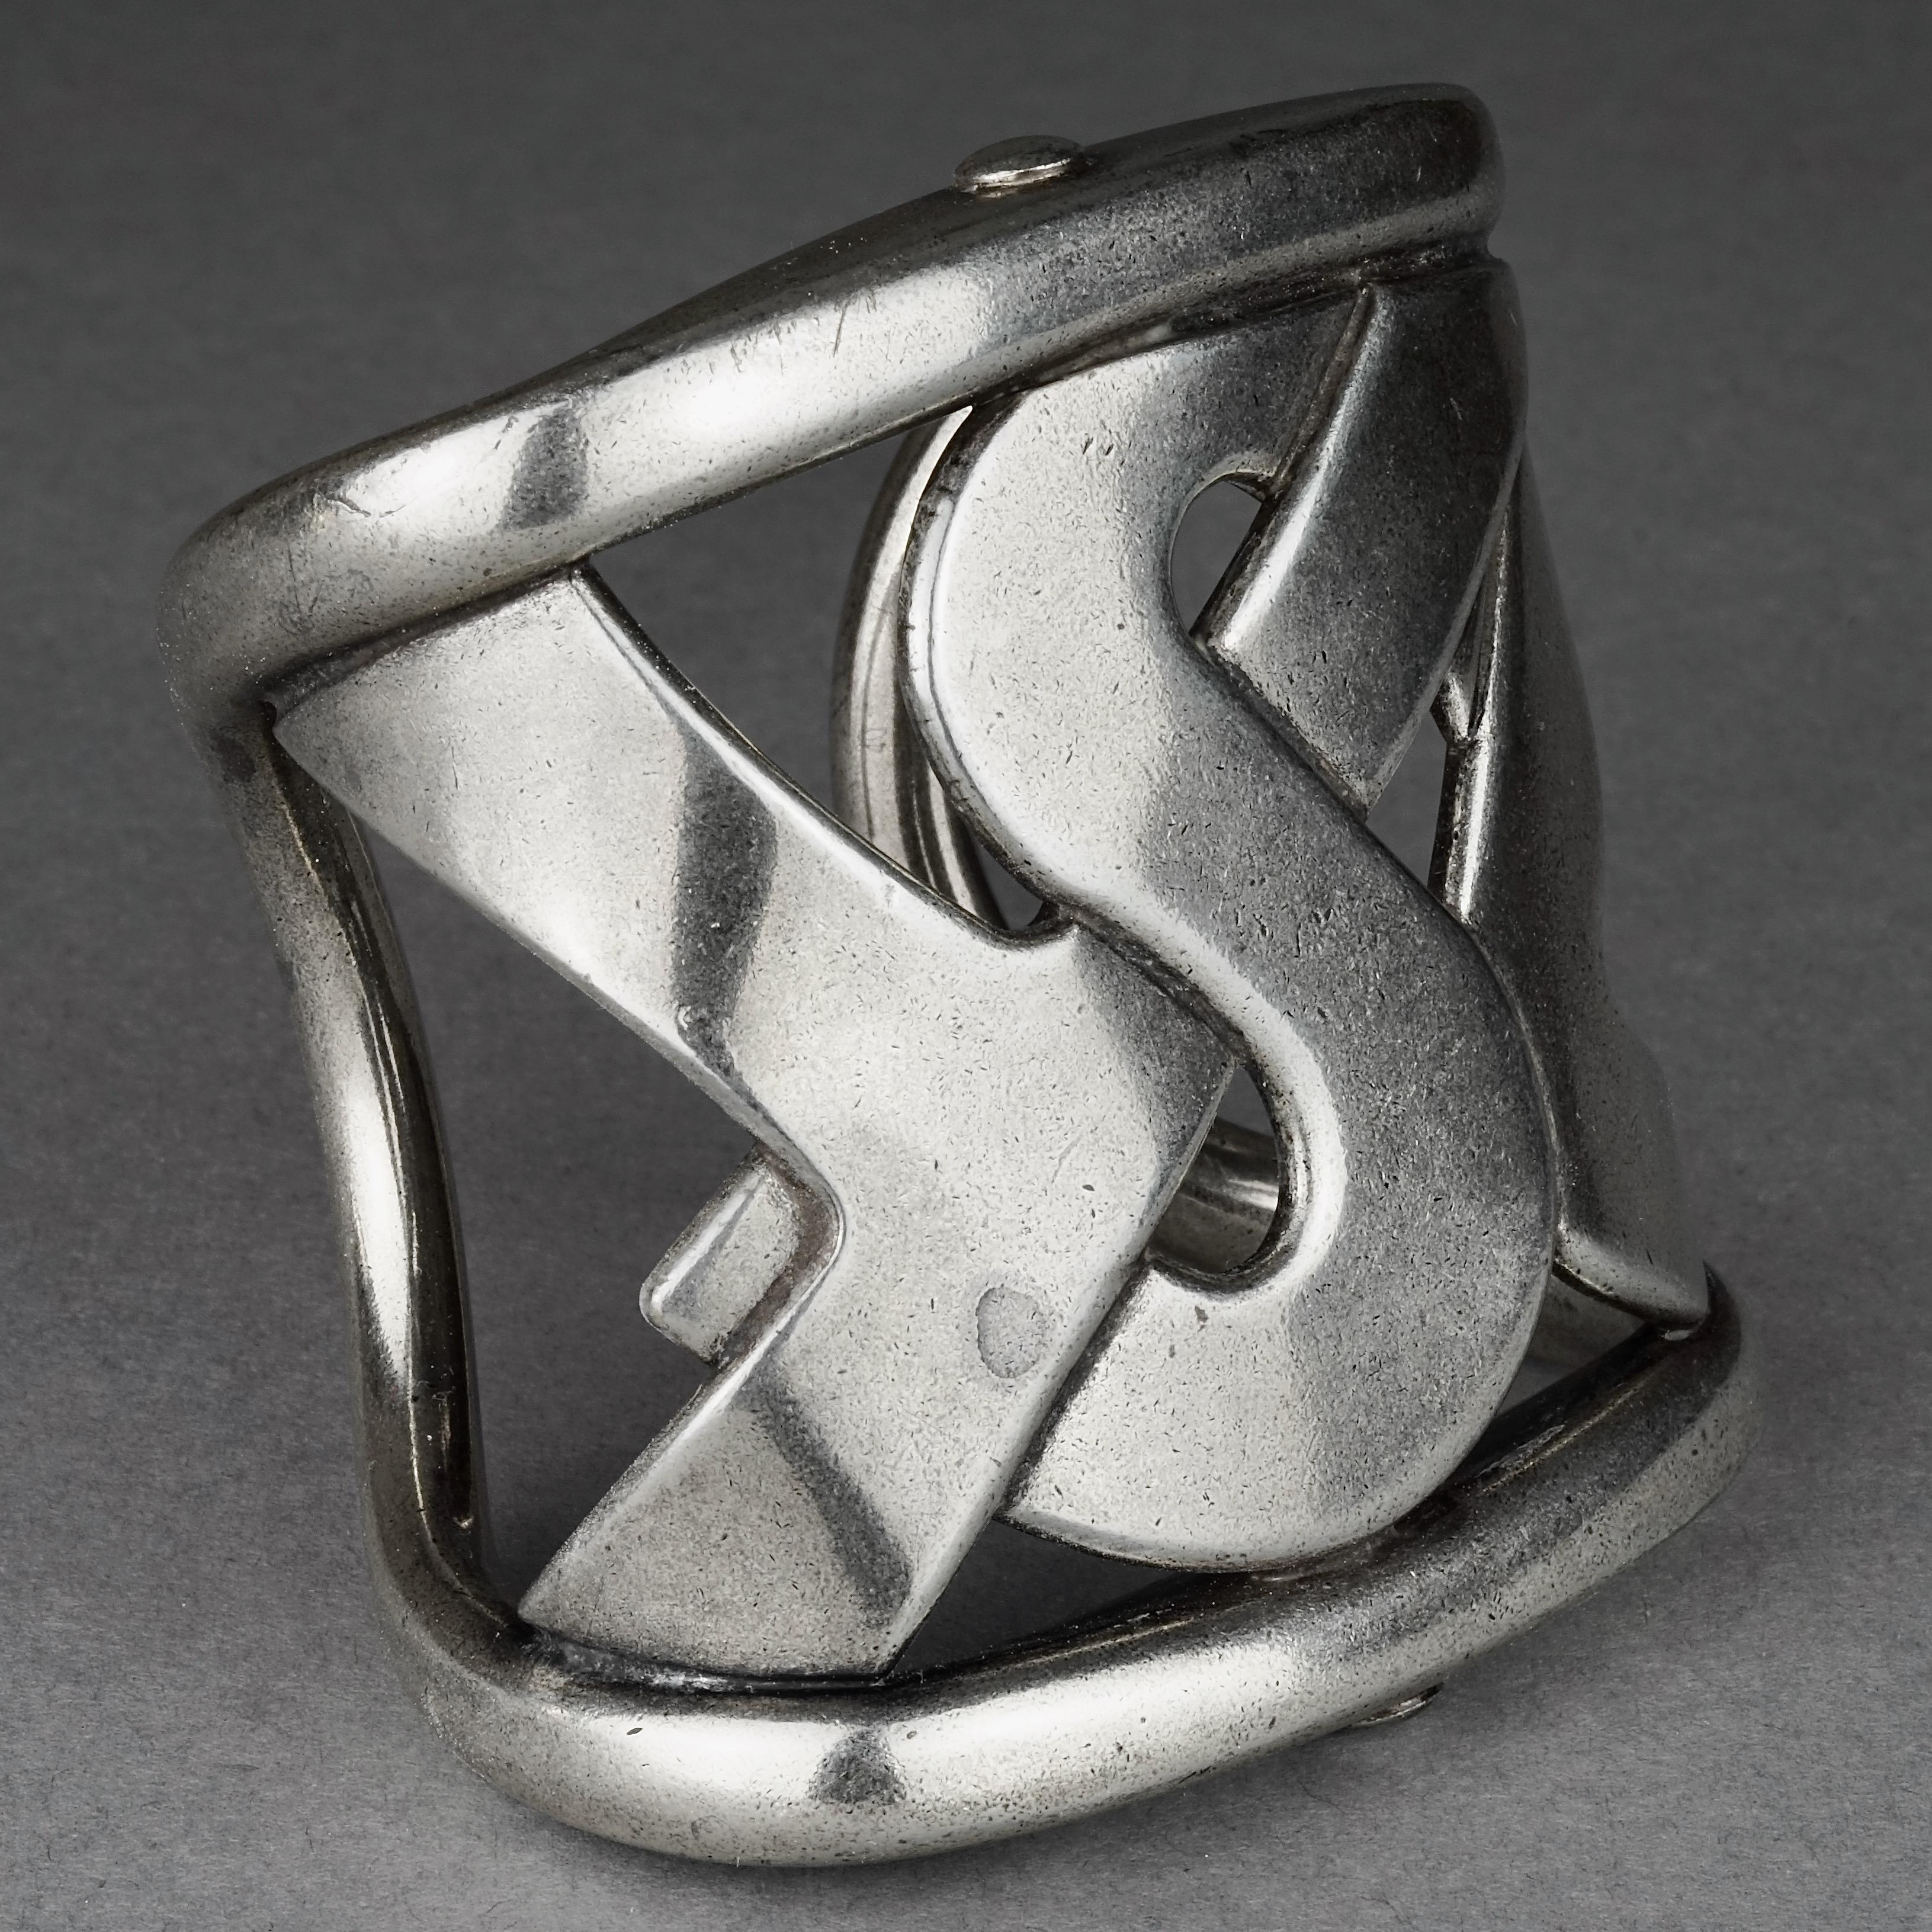 Yves Saint Laurent YSL Logo Wide Silver Cuff Bracelet

Measurements:
Height: 2.95 inches (7.5 cm)
Inside Circumference: 6.50 inches (16.5 cm) 

Features:
- 100% Authentic YVES SAINT LAURENT.
- YSL logo silver cuff.
- Signed YVES SAINT LAURENT Rive